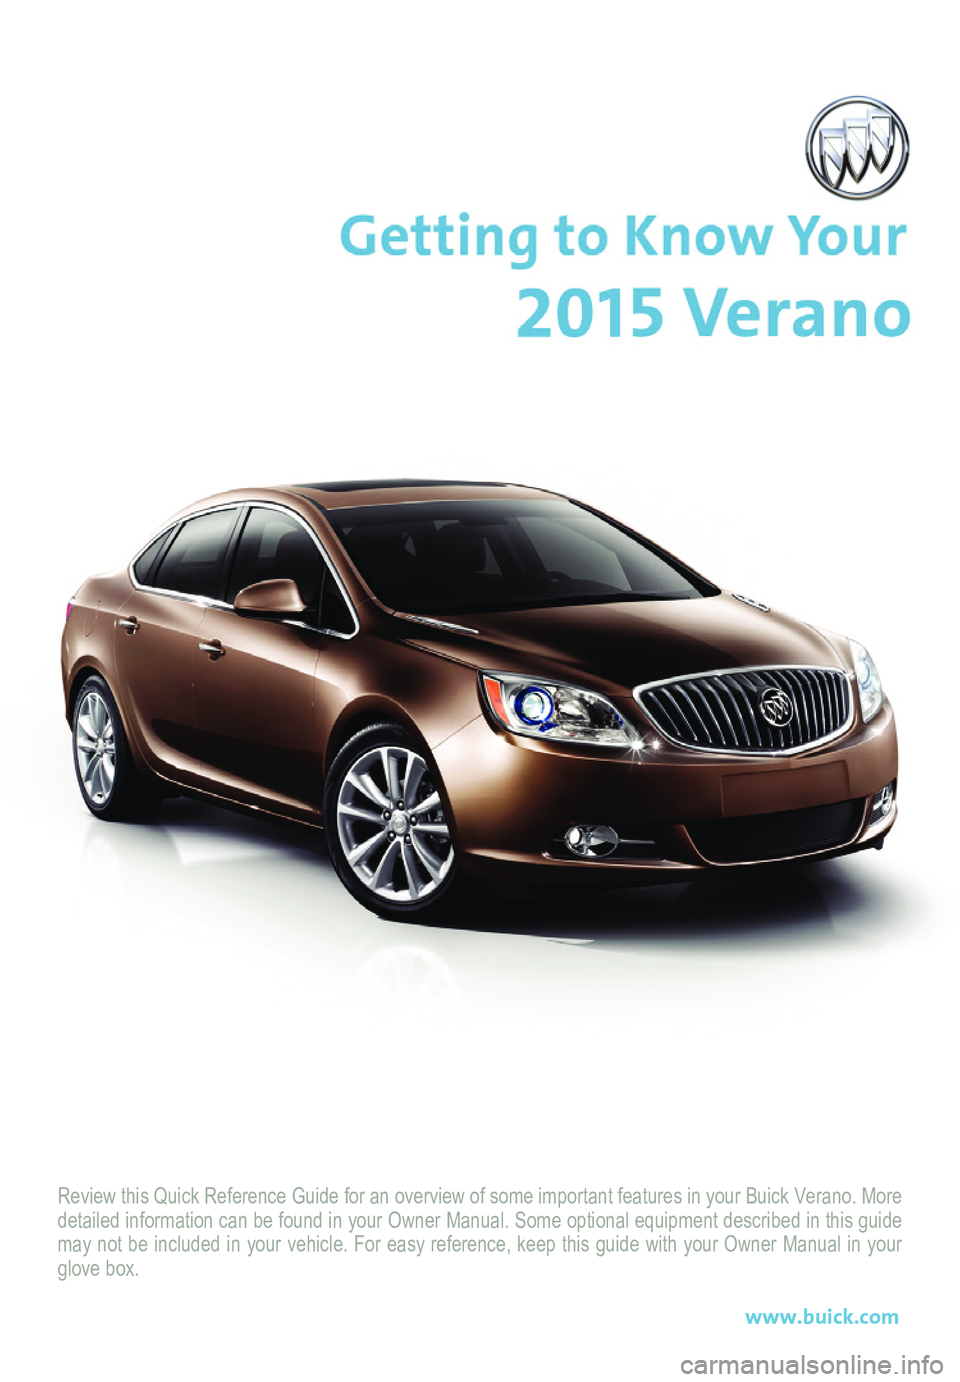 BUICK VERANO 2015  Get To Know Guide Review this Quick Reference Guide for an overview of some important feat\
ures in your Buick Verano. More detailed information can be found in your Owner Manual. Some optional eq\
uipment described in